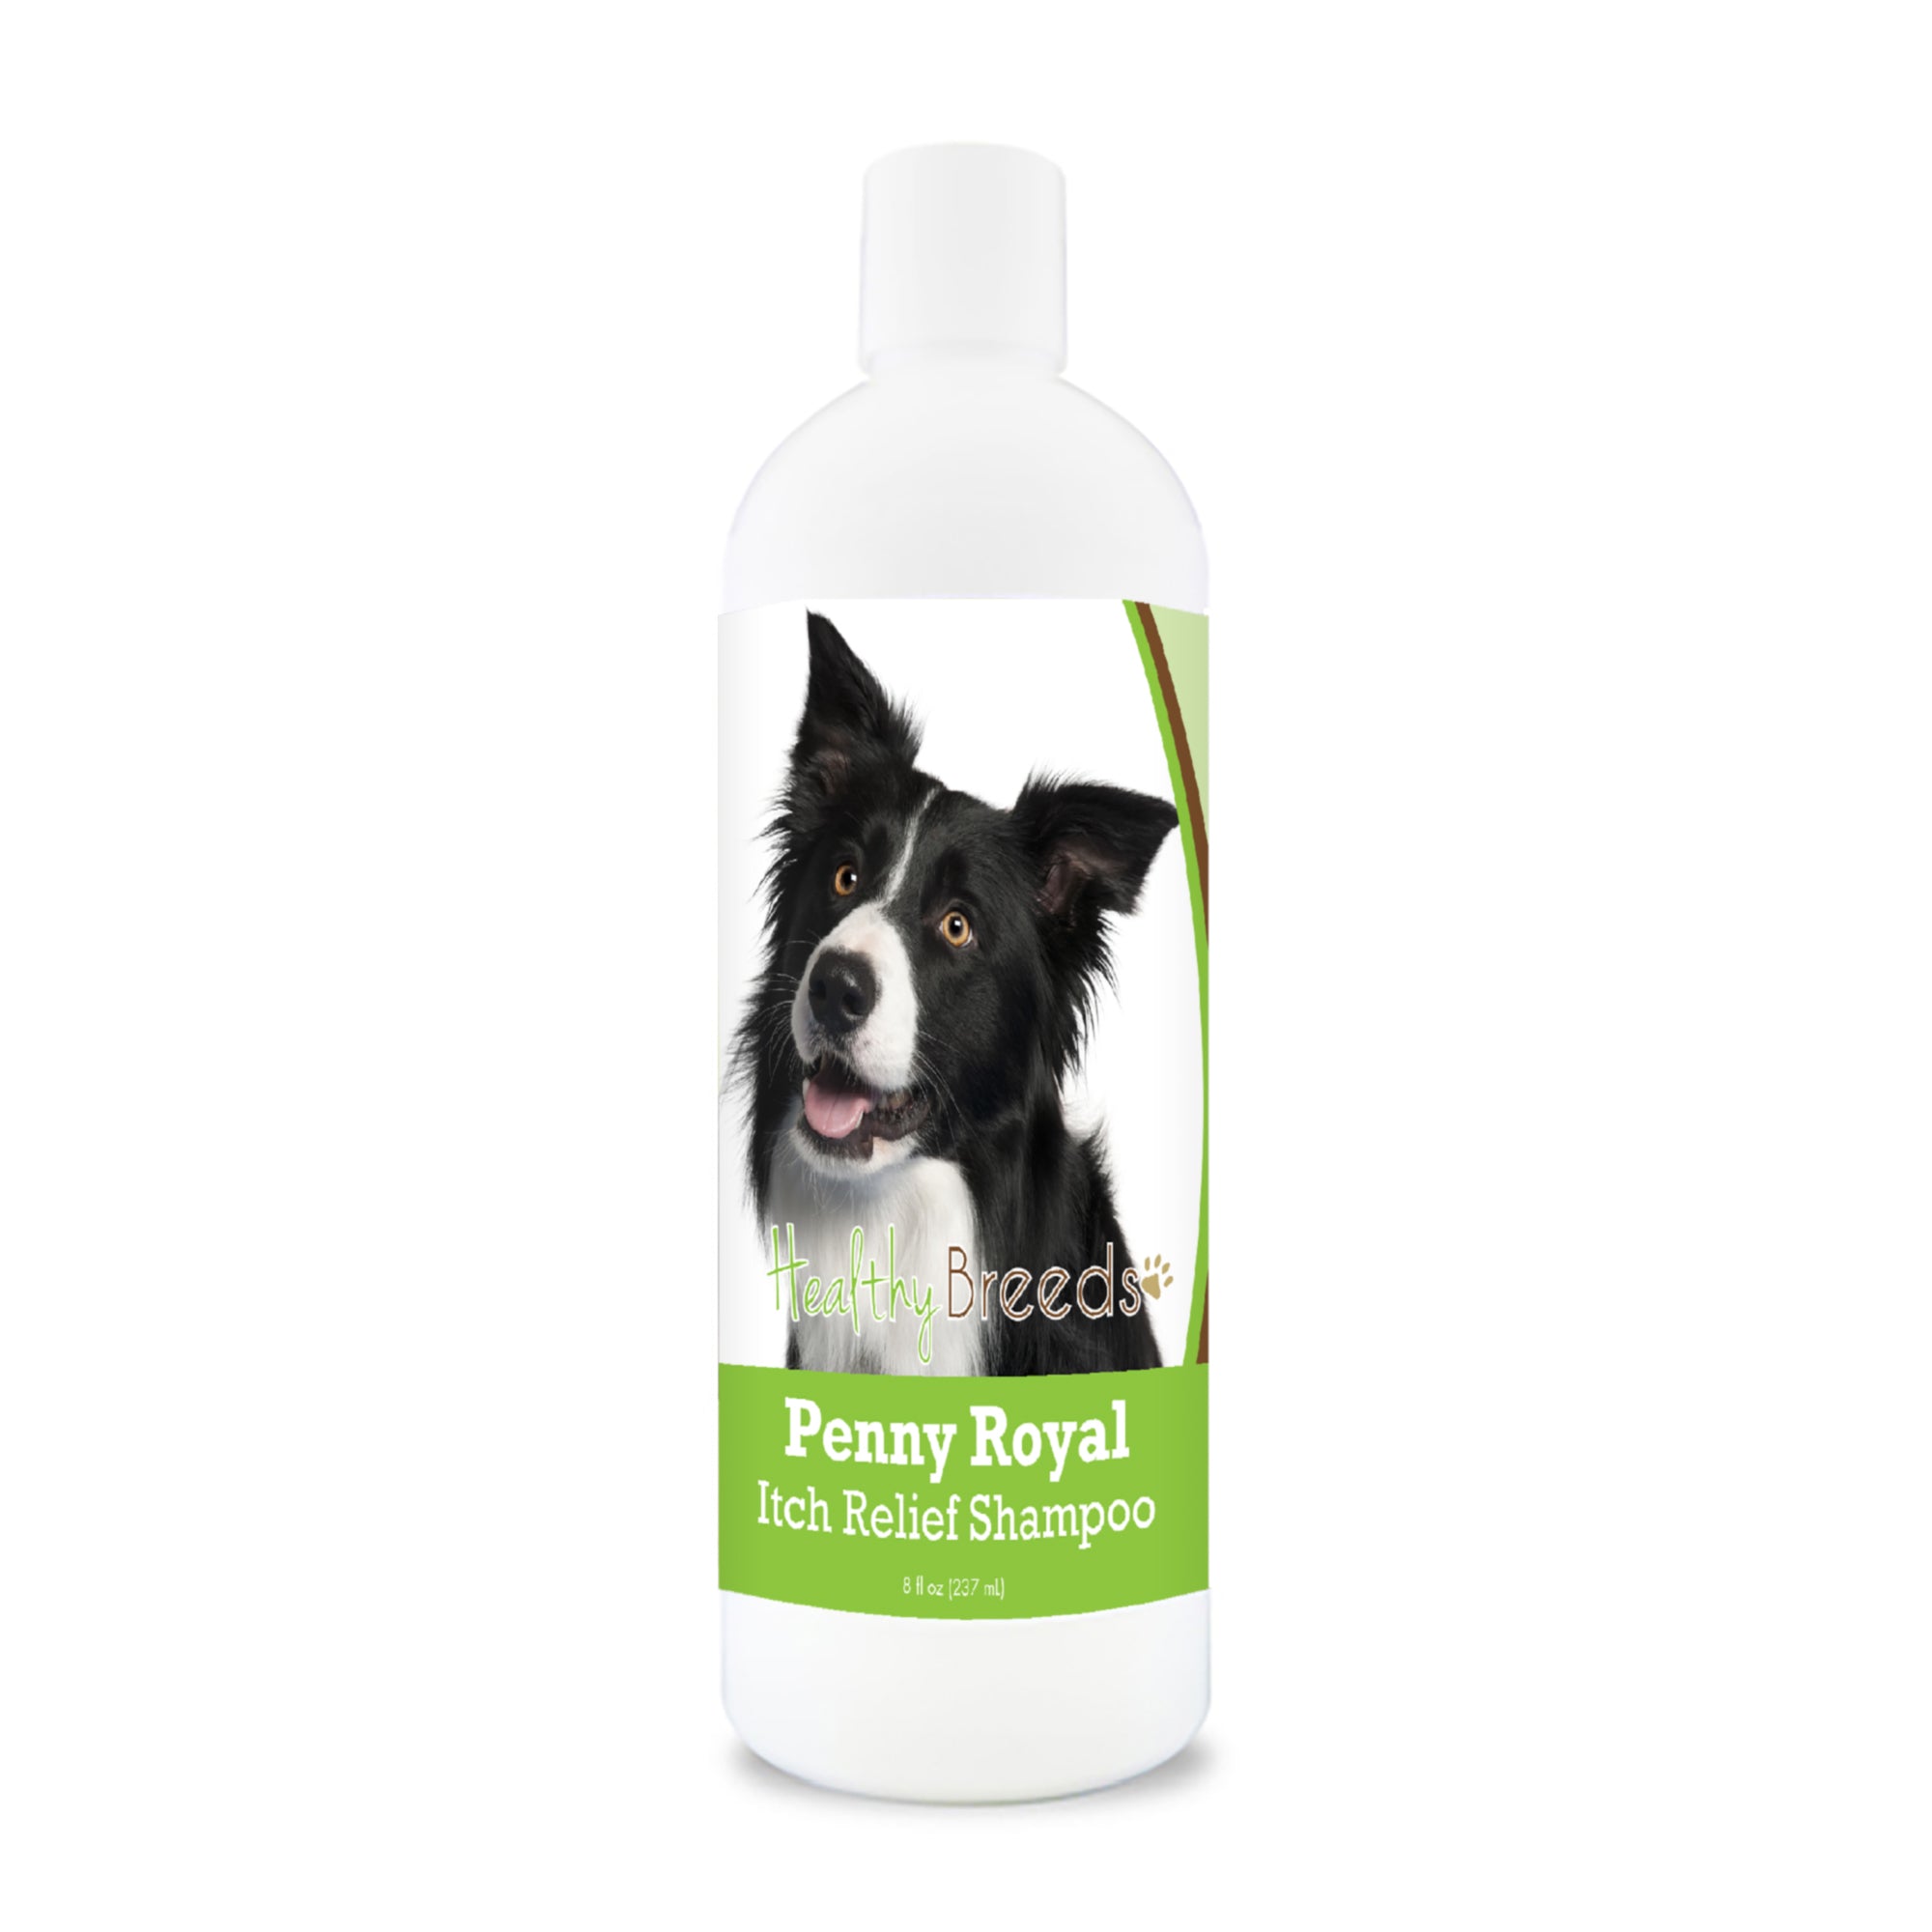 Border Collie Penny Royal Itch Relief Shampoo 8 oz